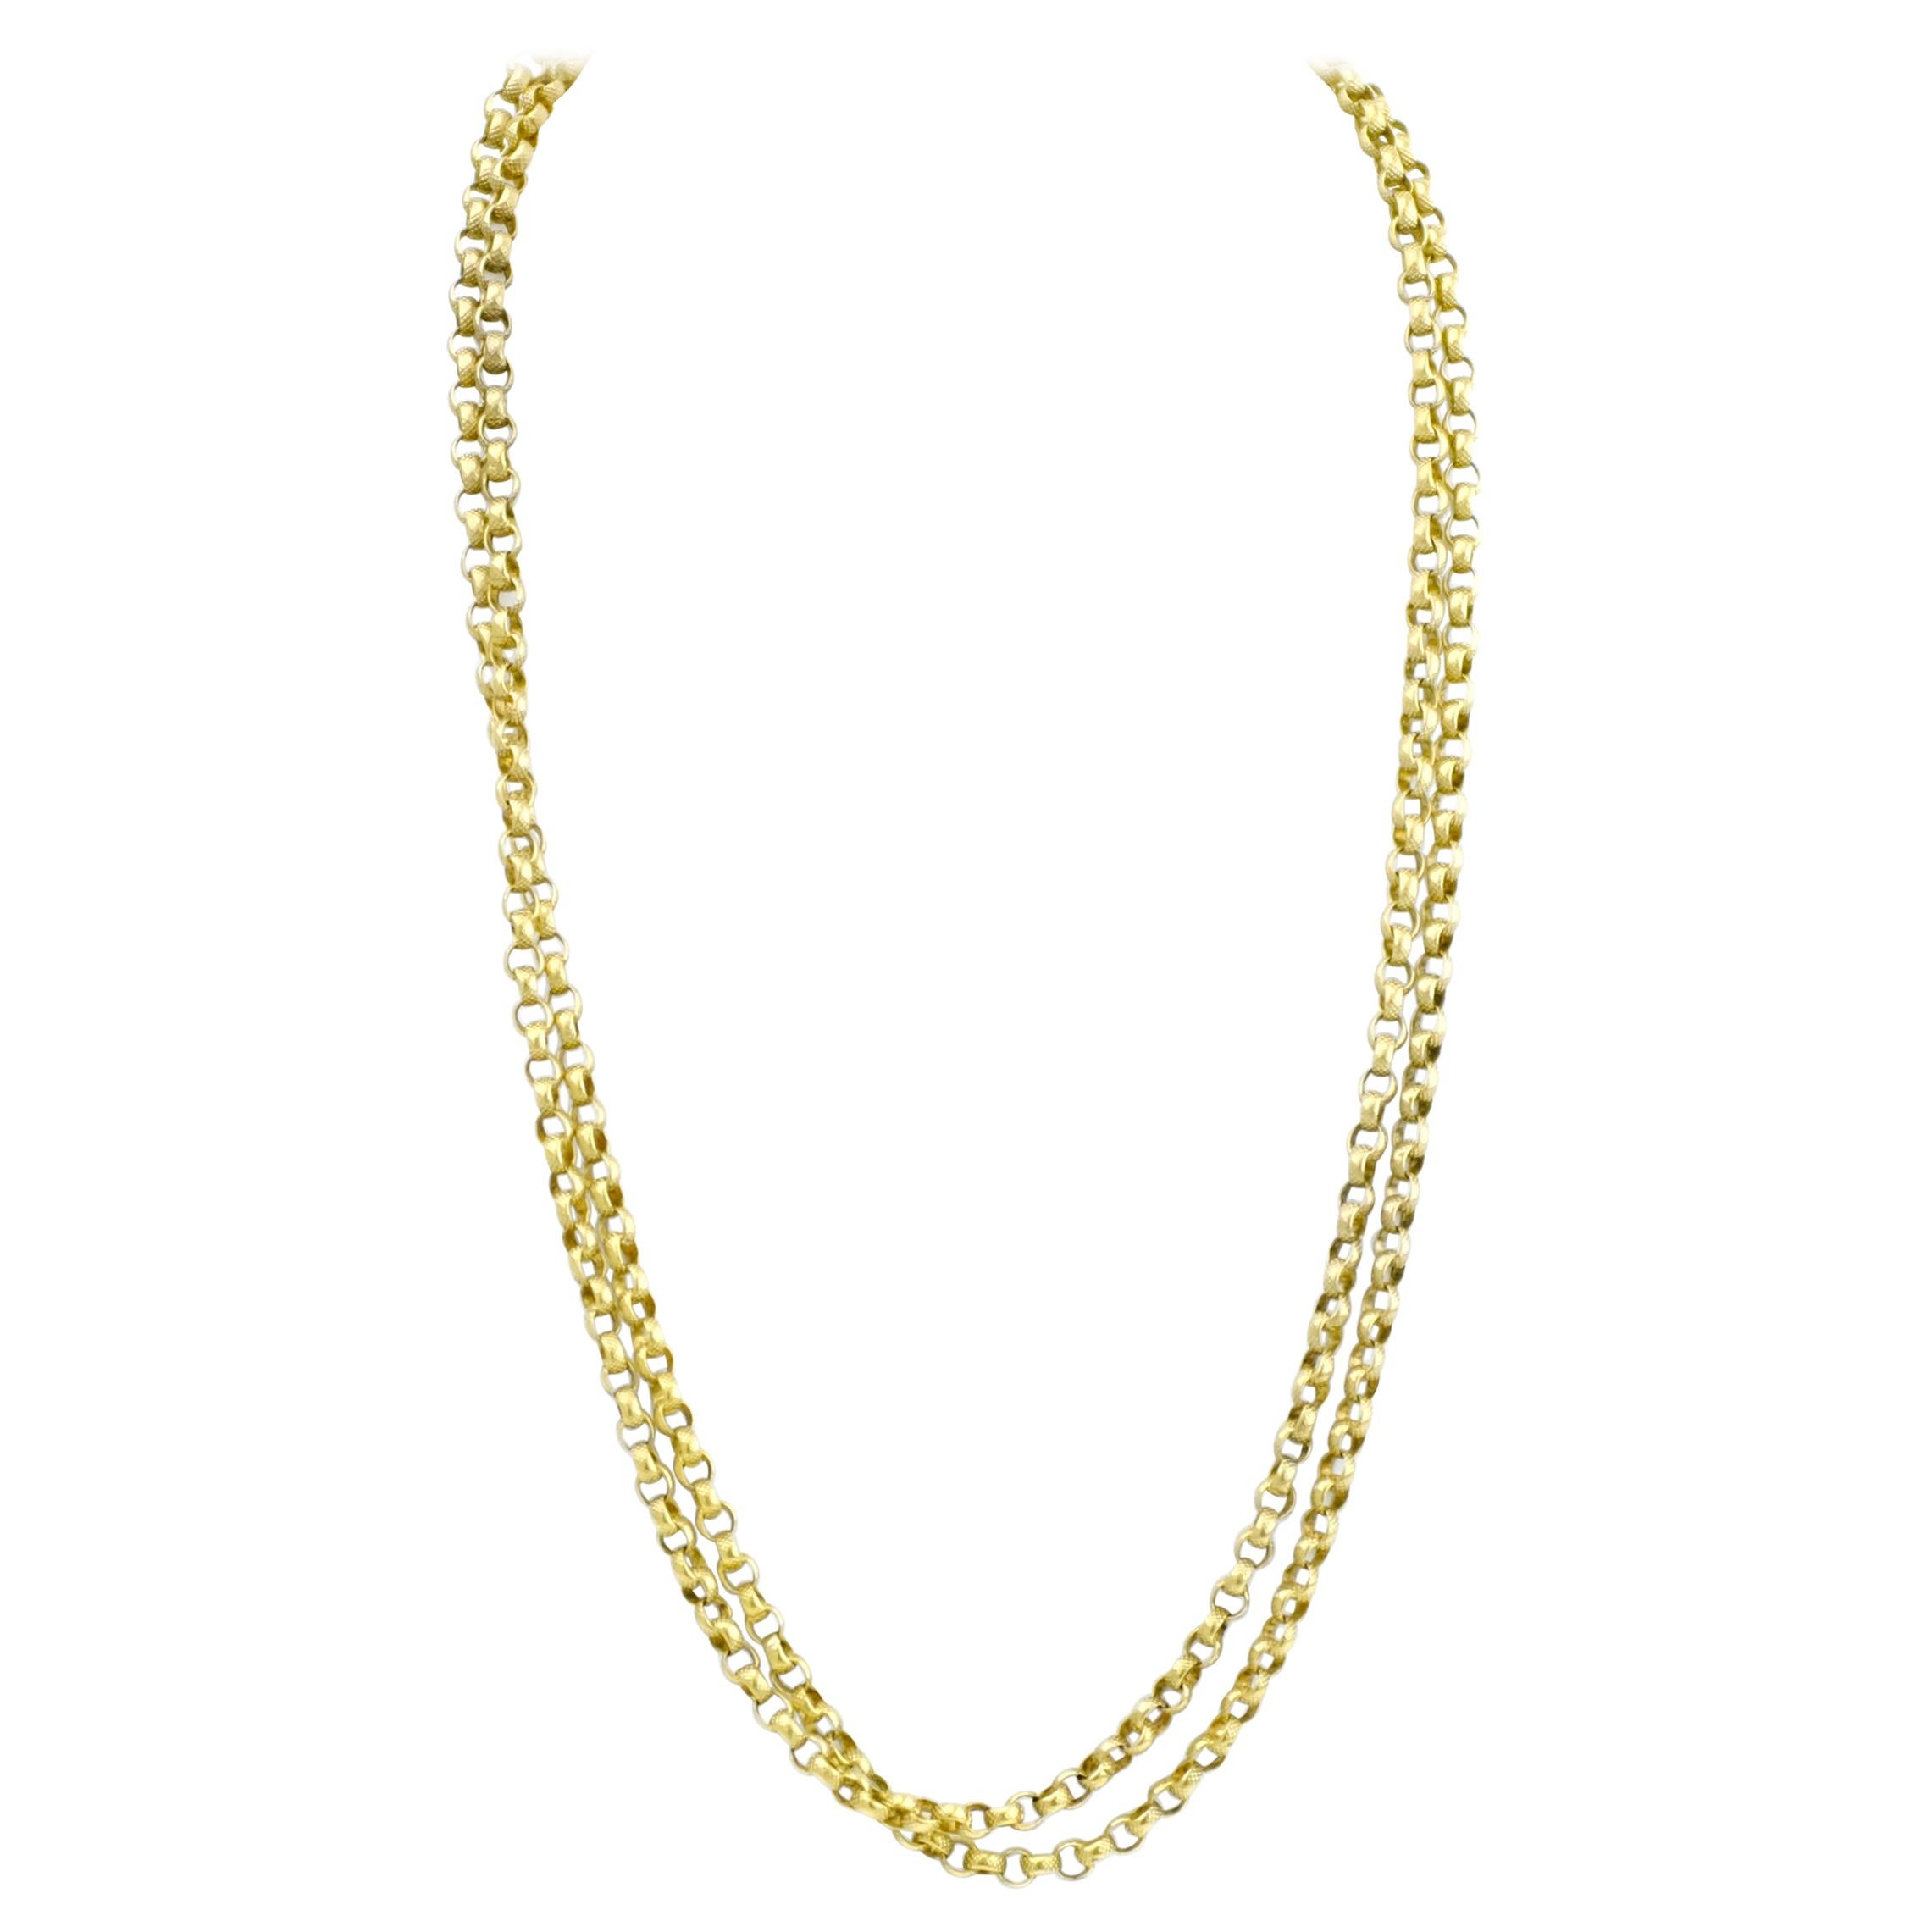 Pinchbeck Gold Chain from Victorian England